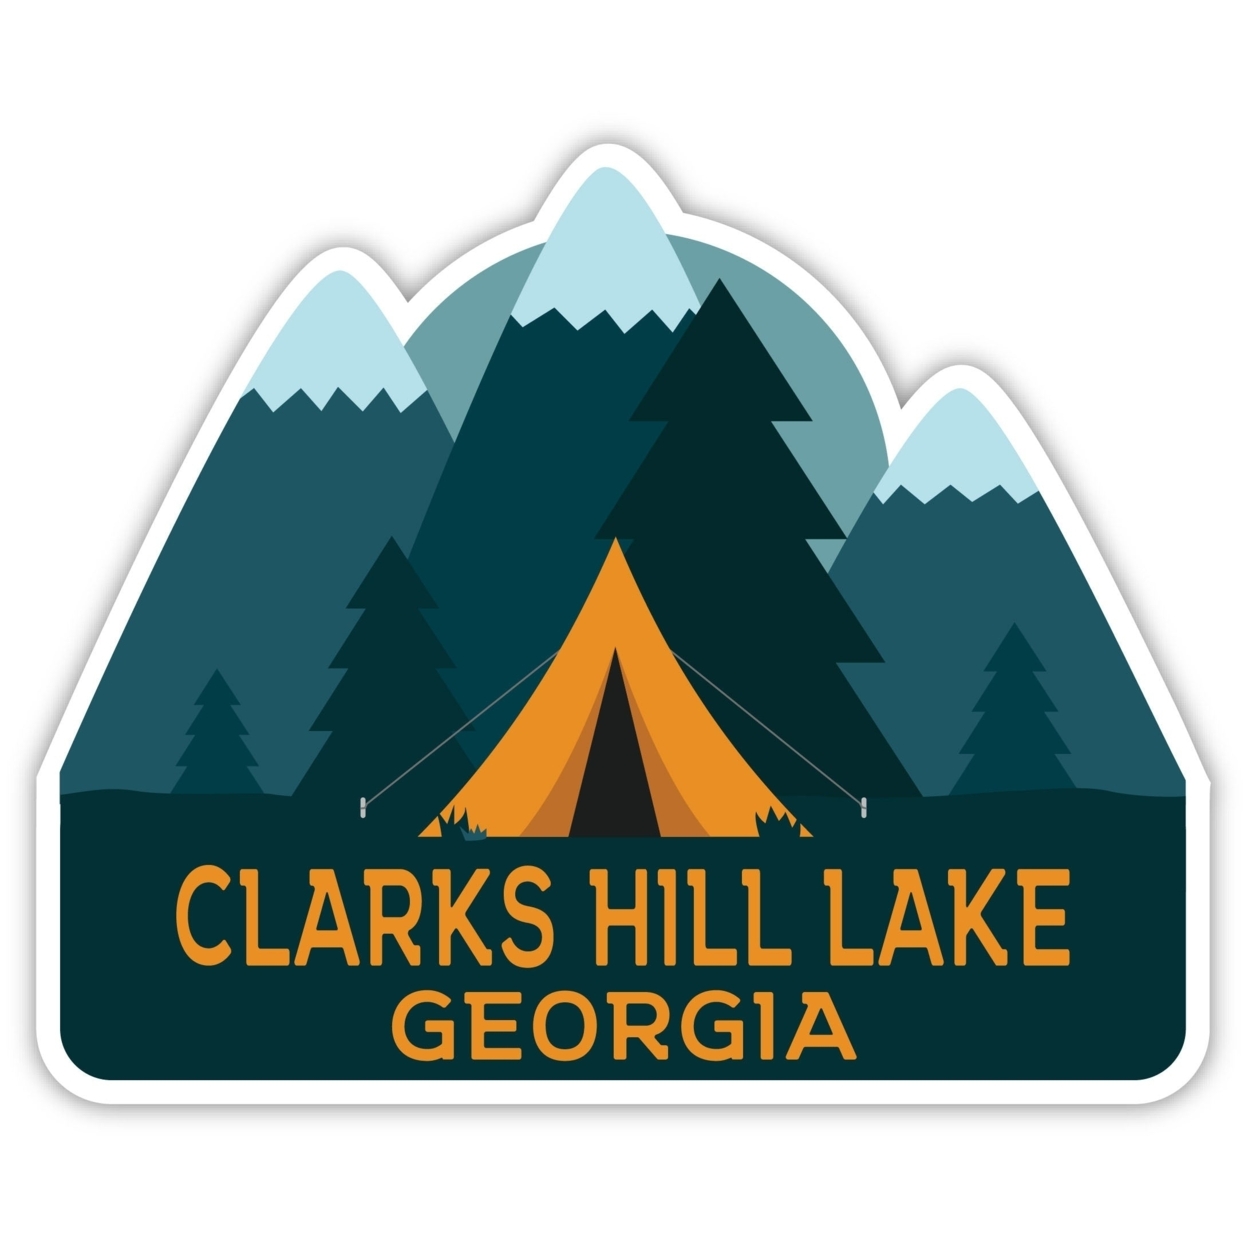 Clarks Hill Lake Georgia Souvenir Decorative Stickers (Choose Theme And Size) - 4-Pack, 6-Inch, Tent